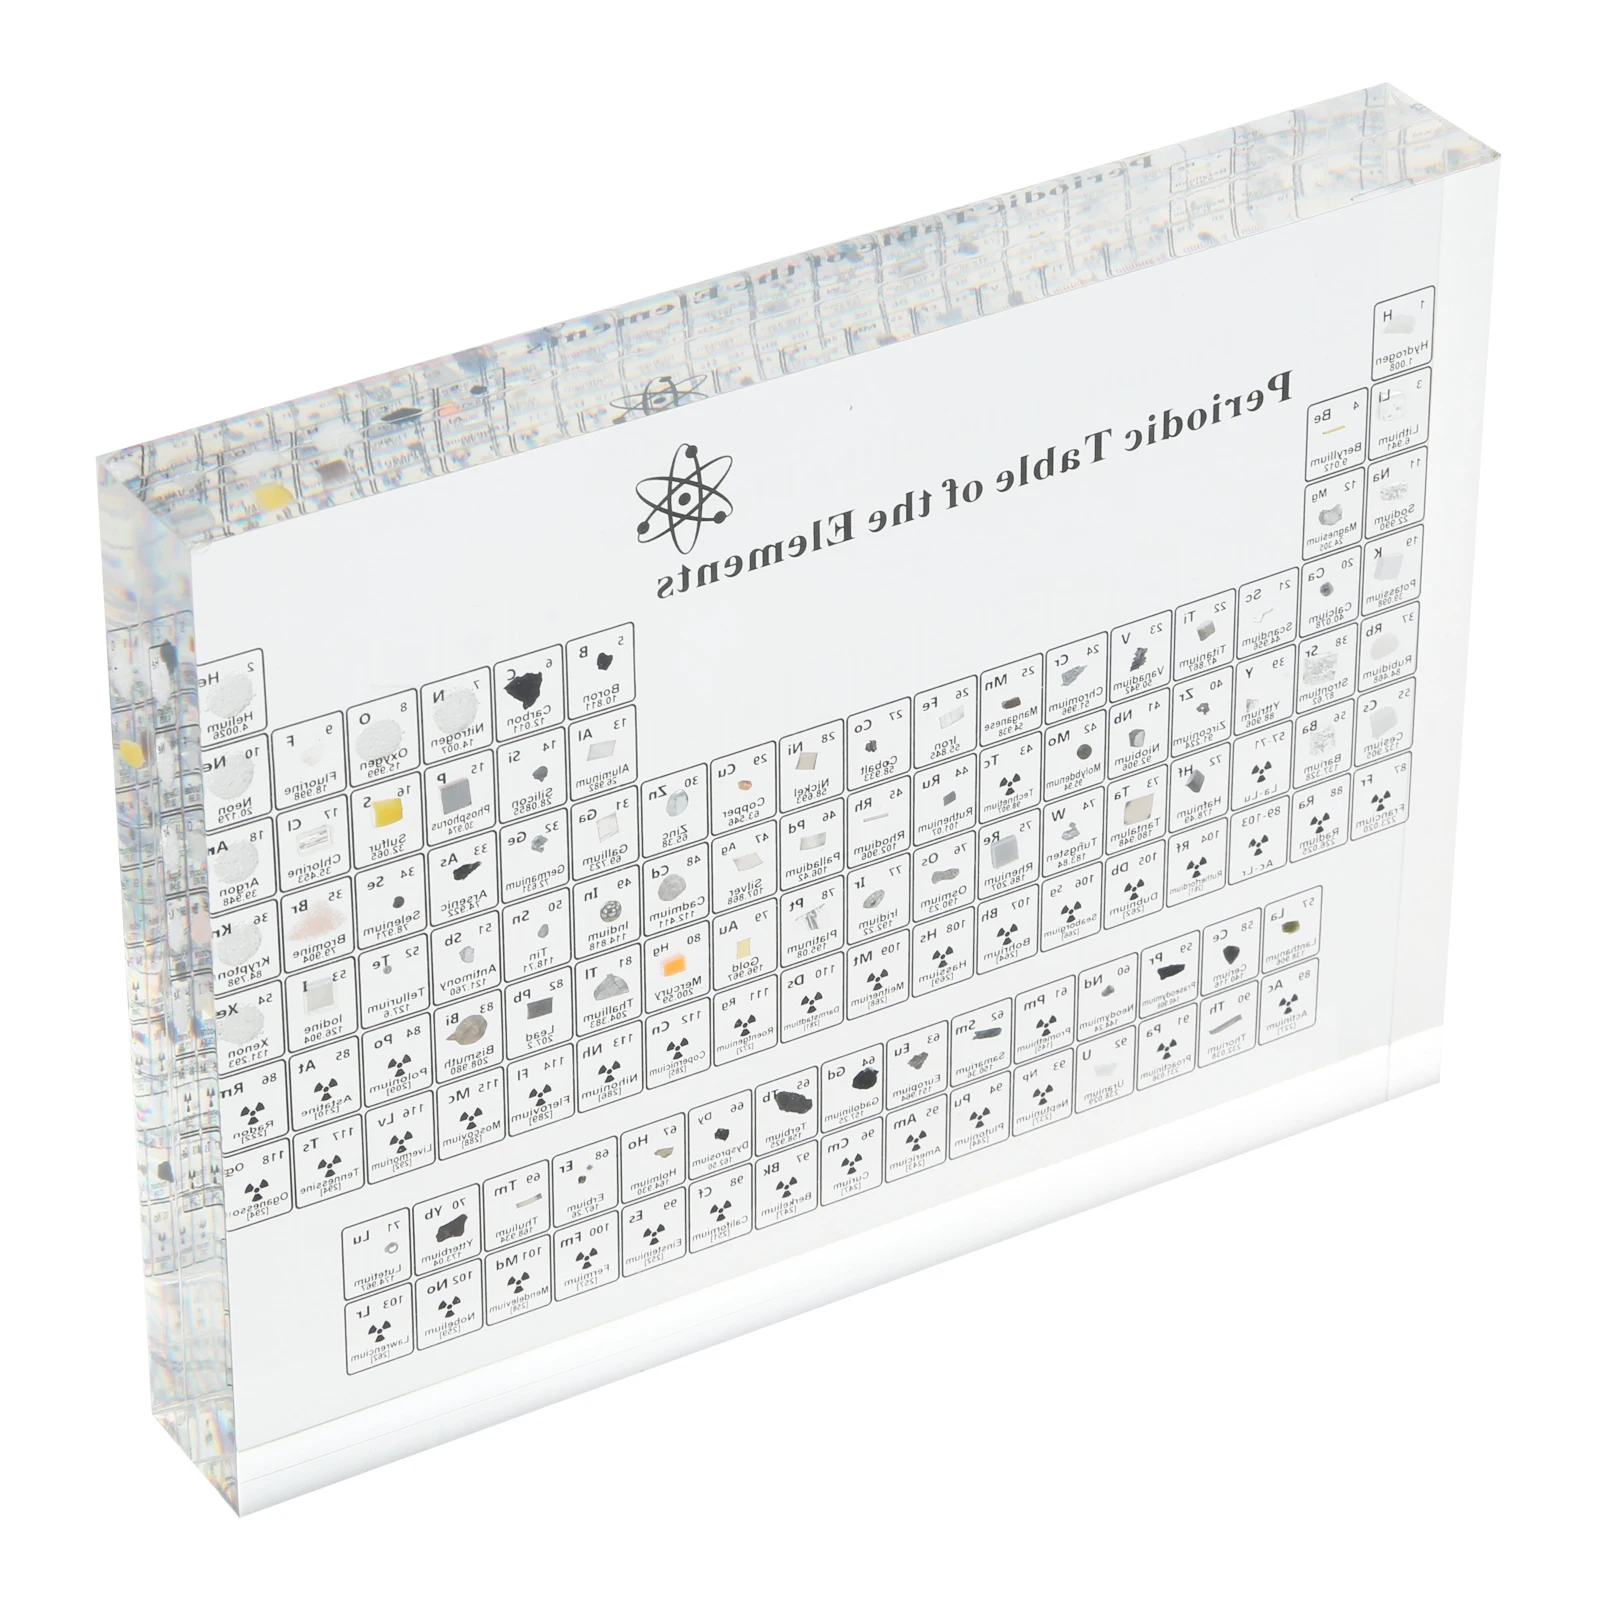 1pc Real Elements Samples Acrylic Periodic Table ids Teaching School Display Chemical Element Home Decor 15 x 11.4 x 2cm